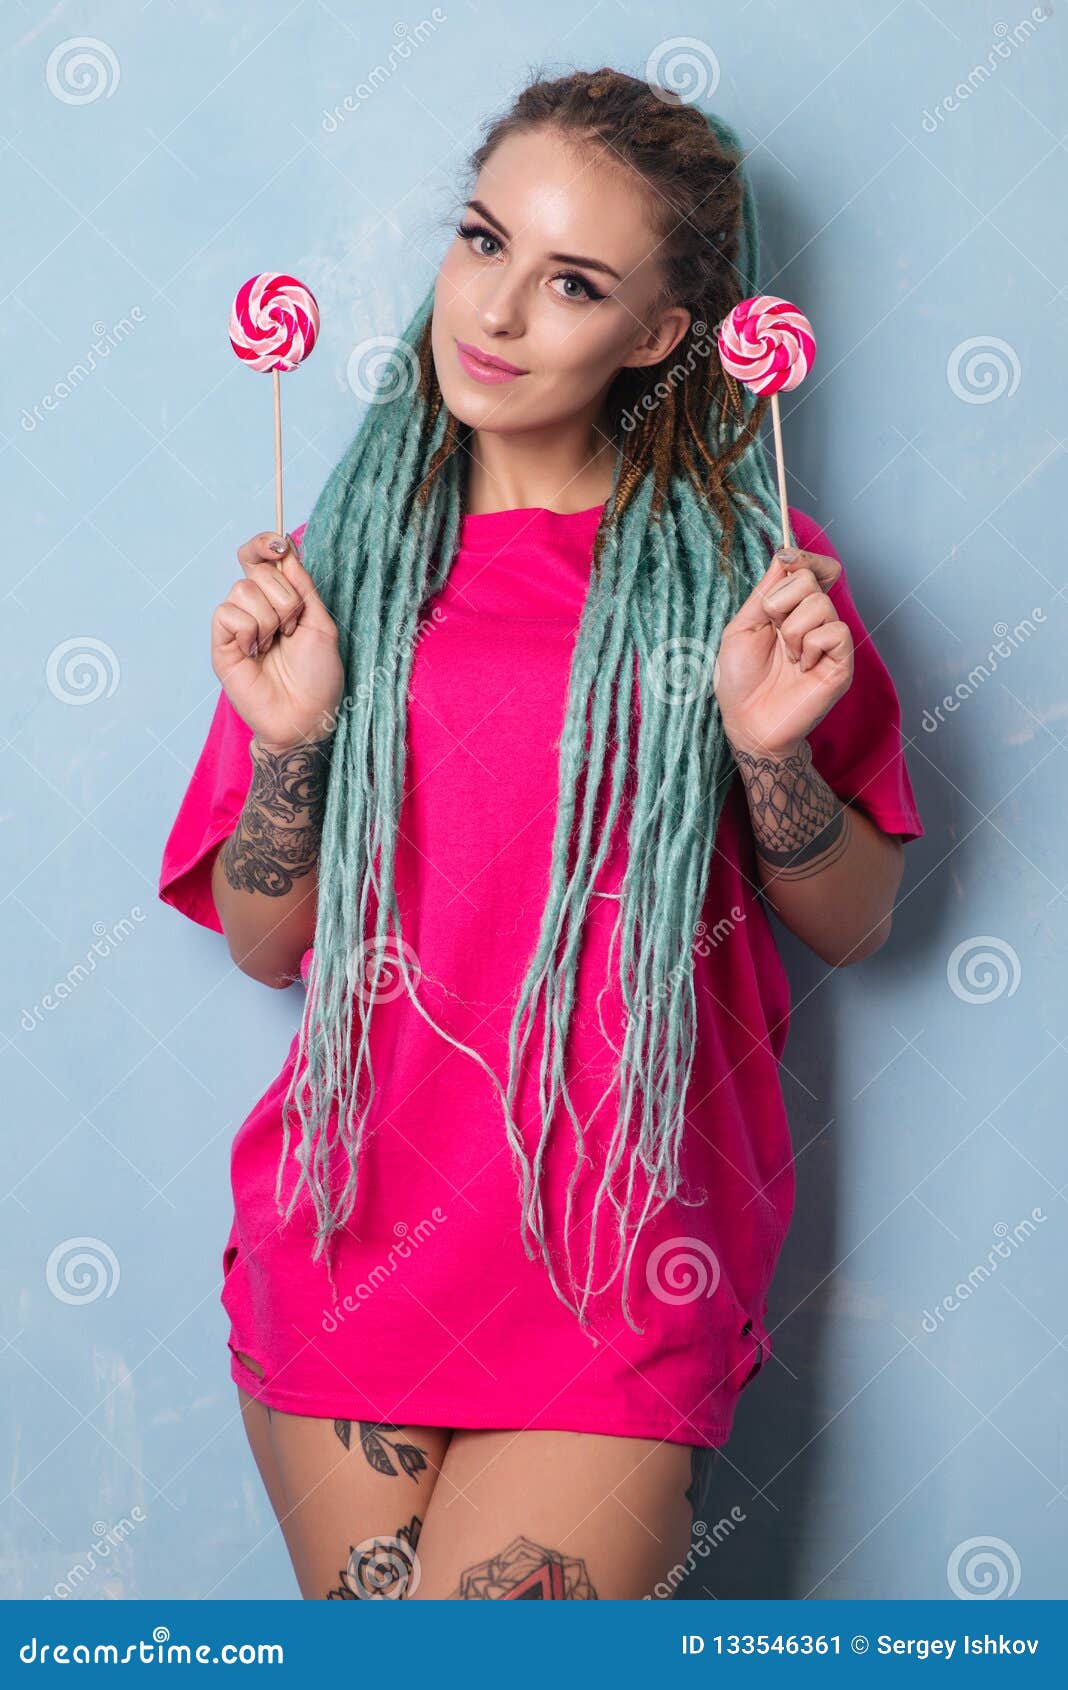 Cute Girl In Pink T Shirt With Dreadlocks And Tattoo Holding